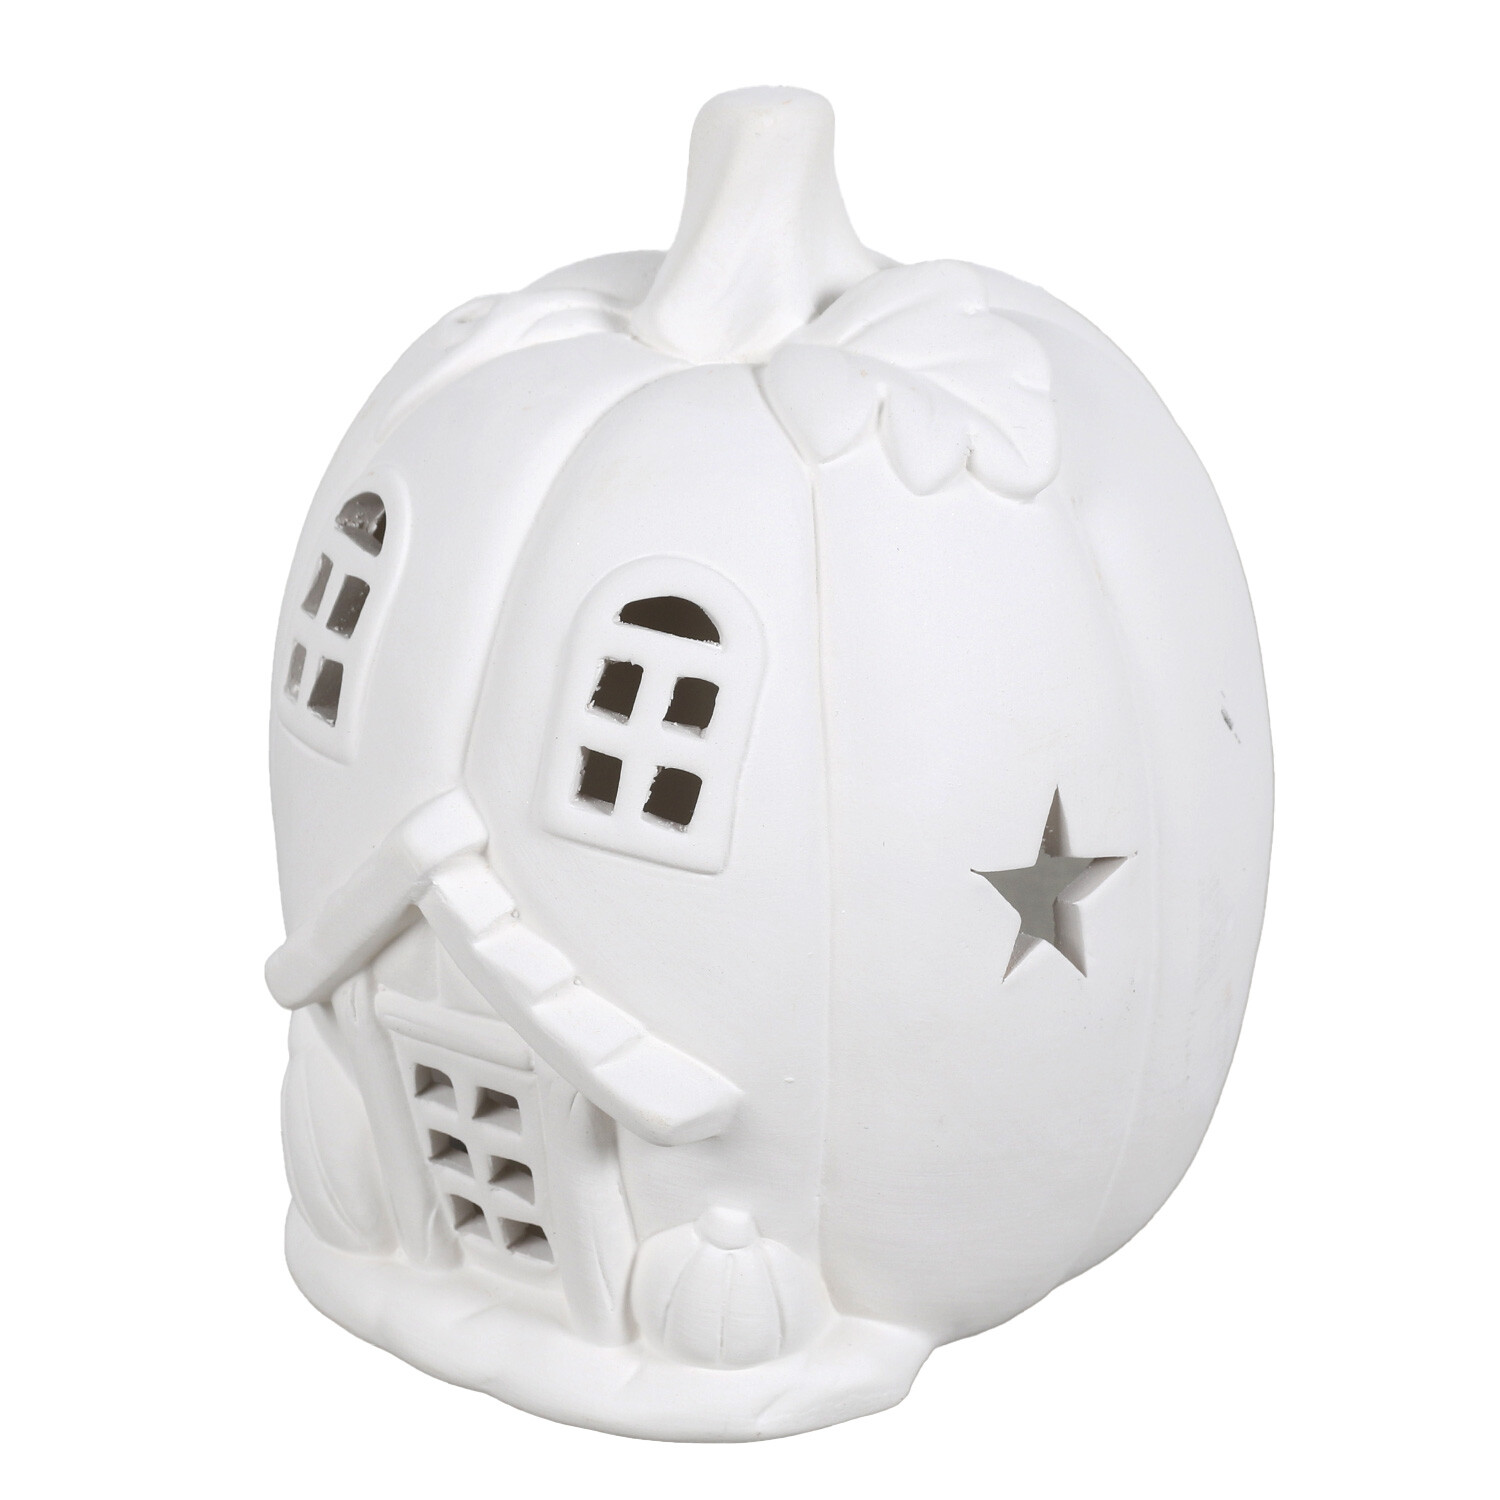 Paint Your Own Ceramic Pumpkin House - White Image 2